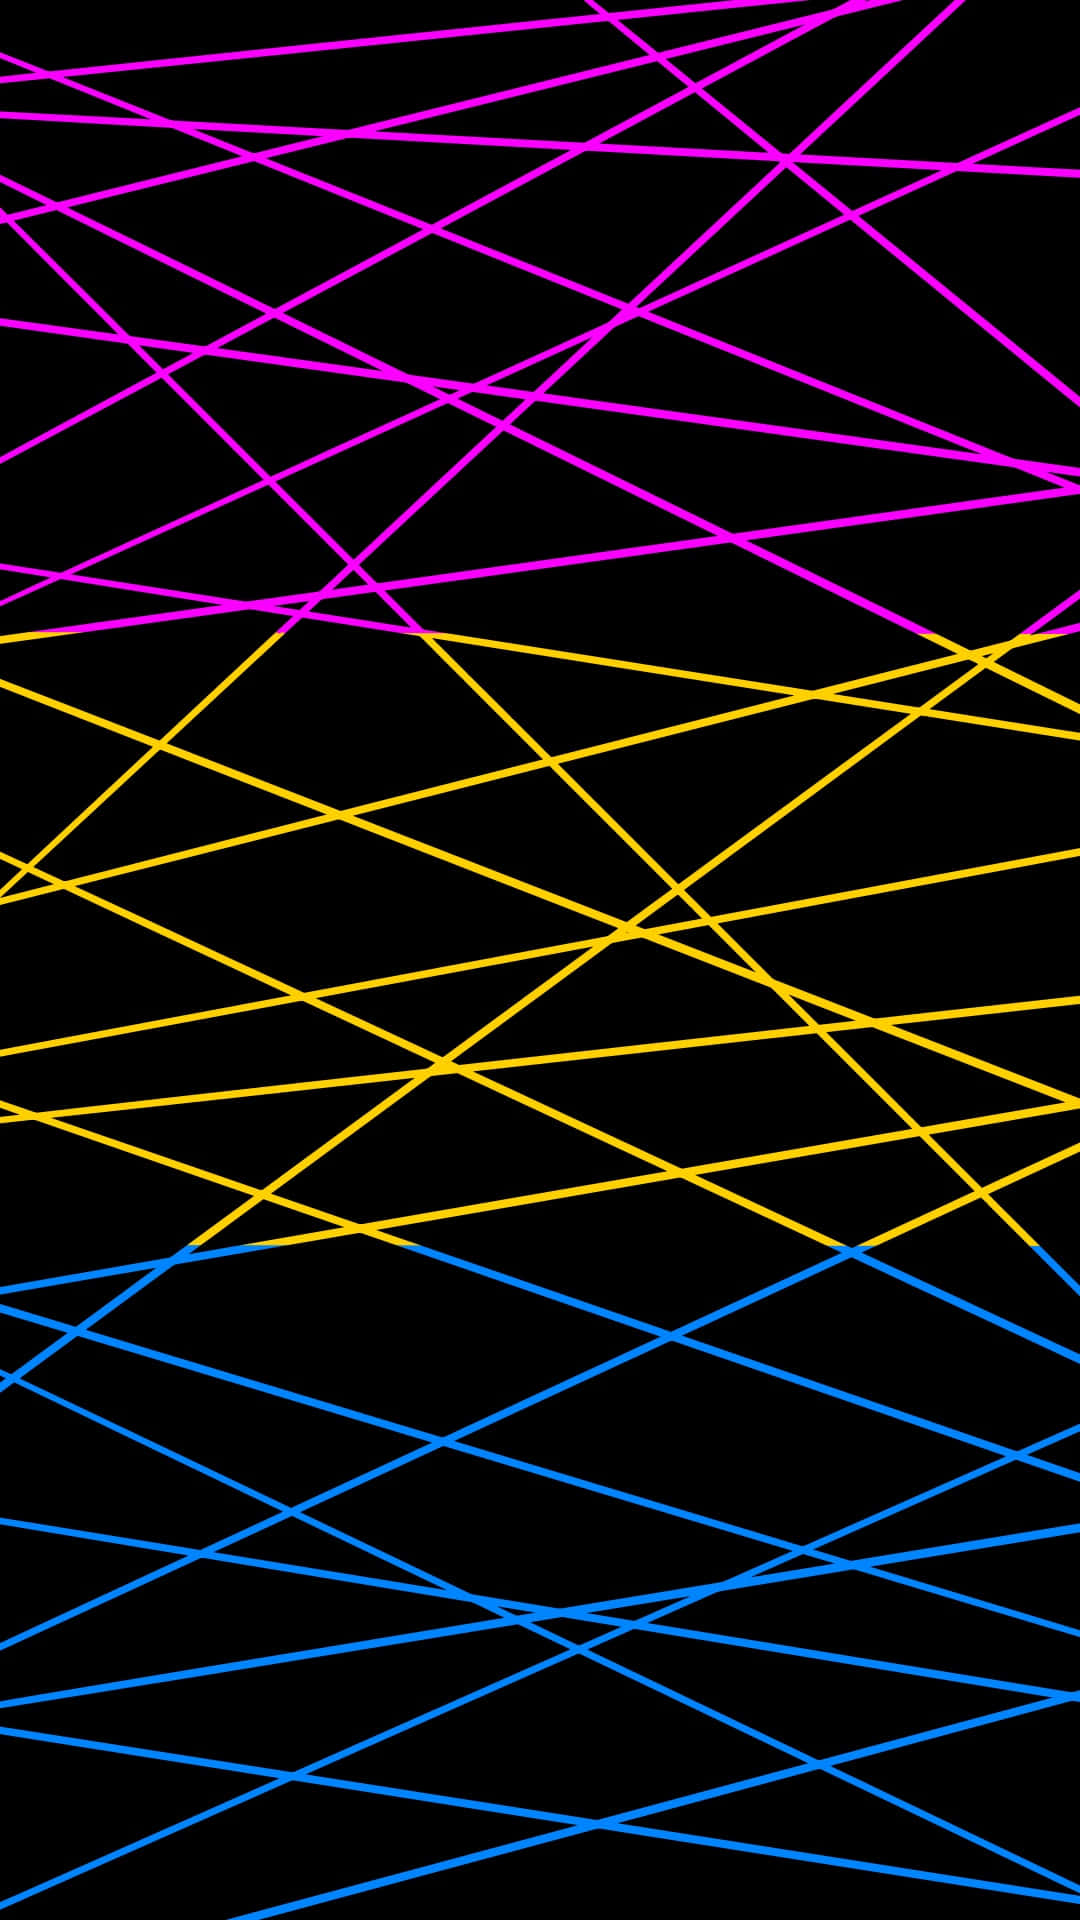 A Black Background With Lines Of Different Colors